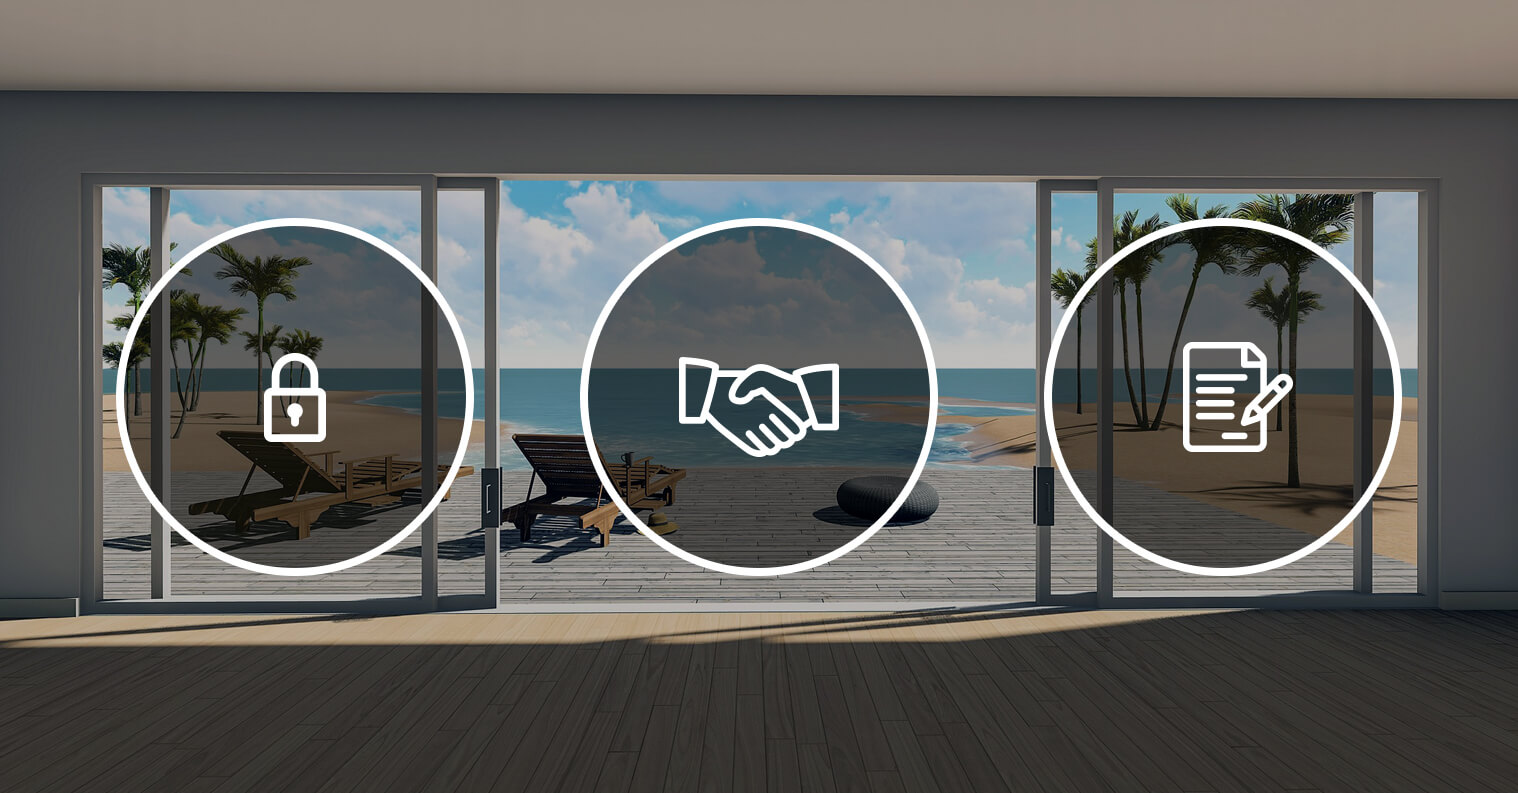  photo of glass doors opening to a beach with overlays of icons of a lock, handshake, and signing a paper